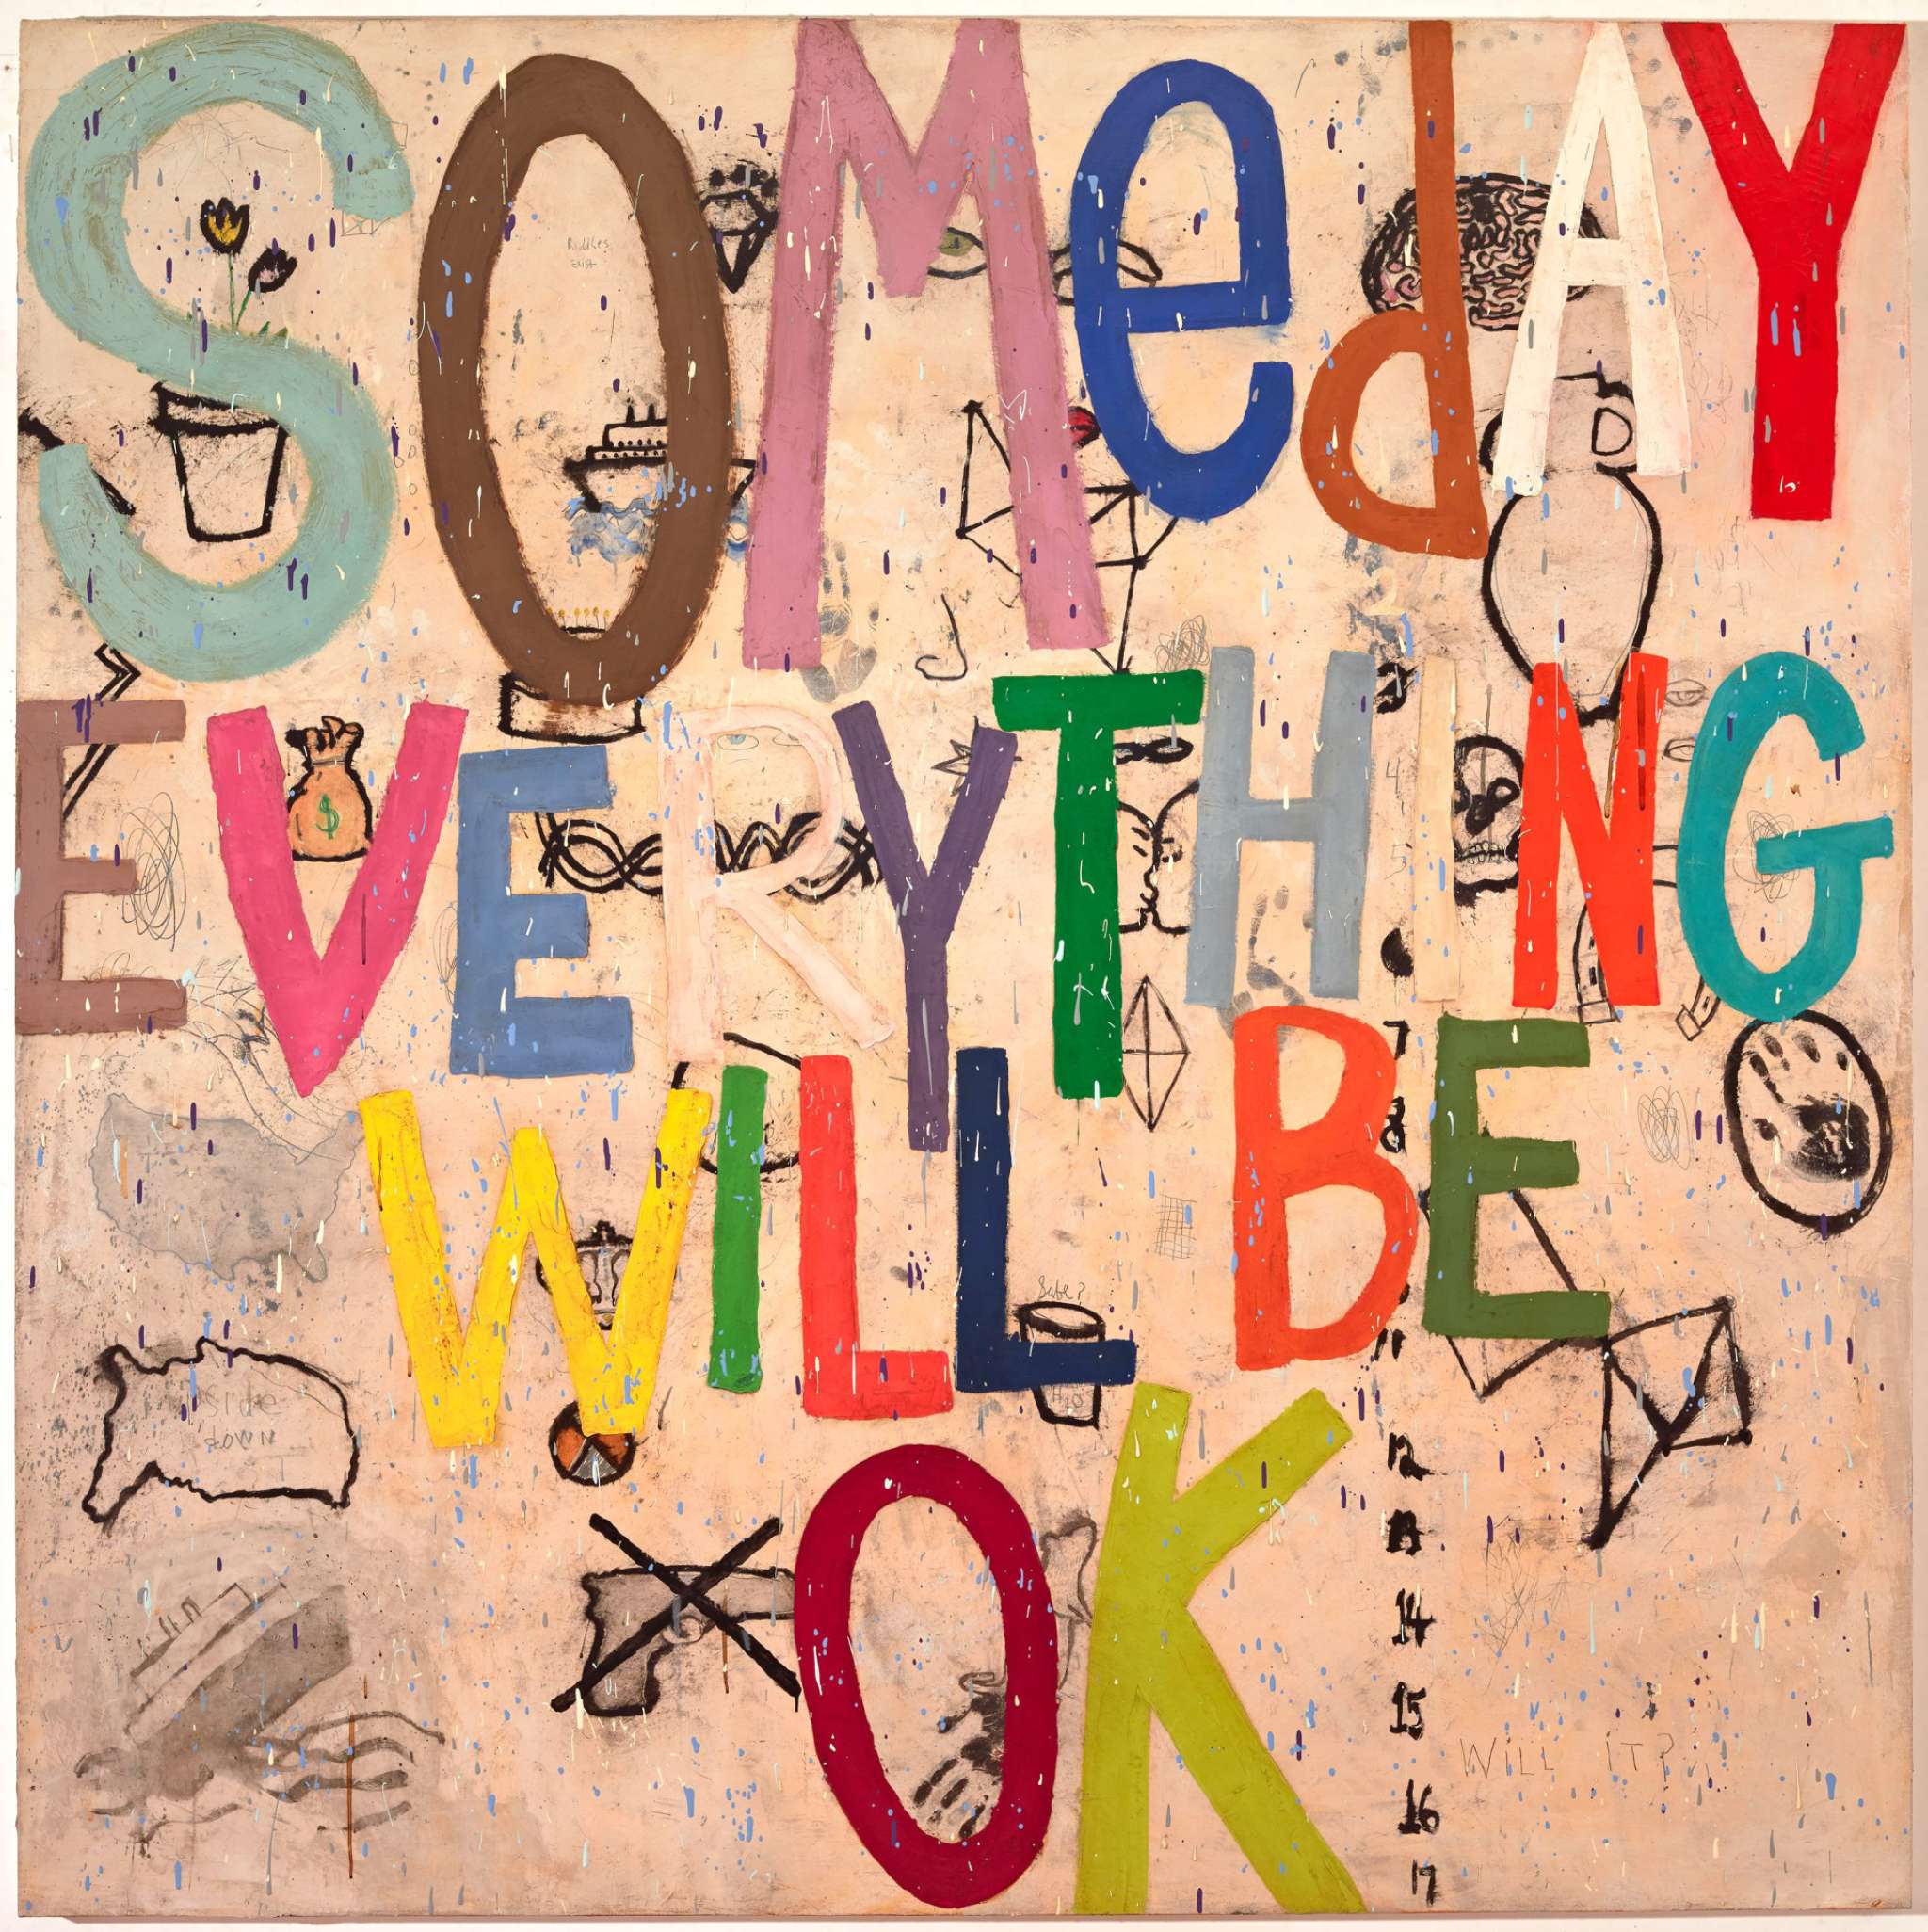 Someday everything will be okay art.